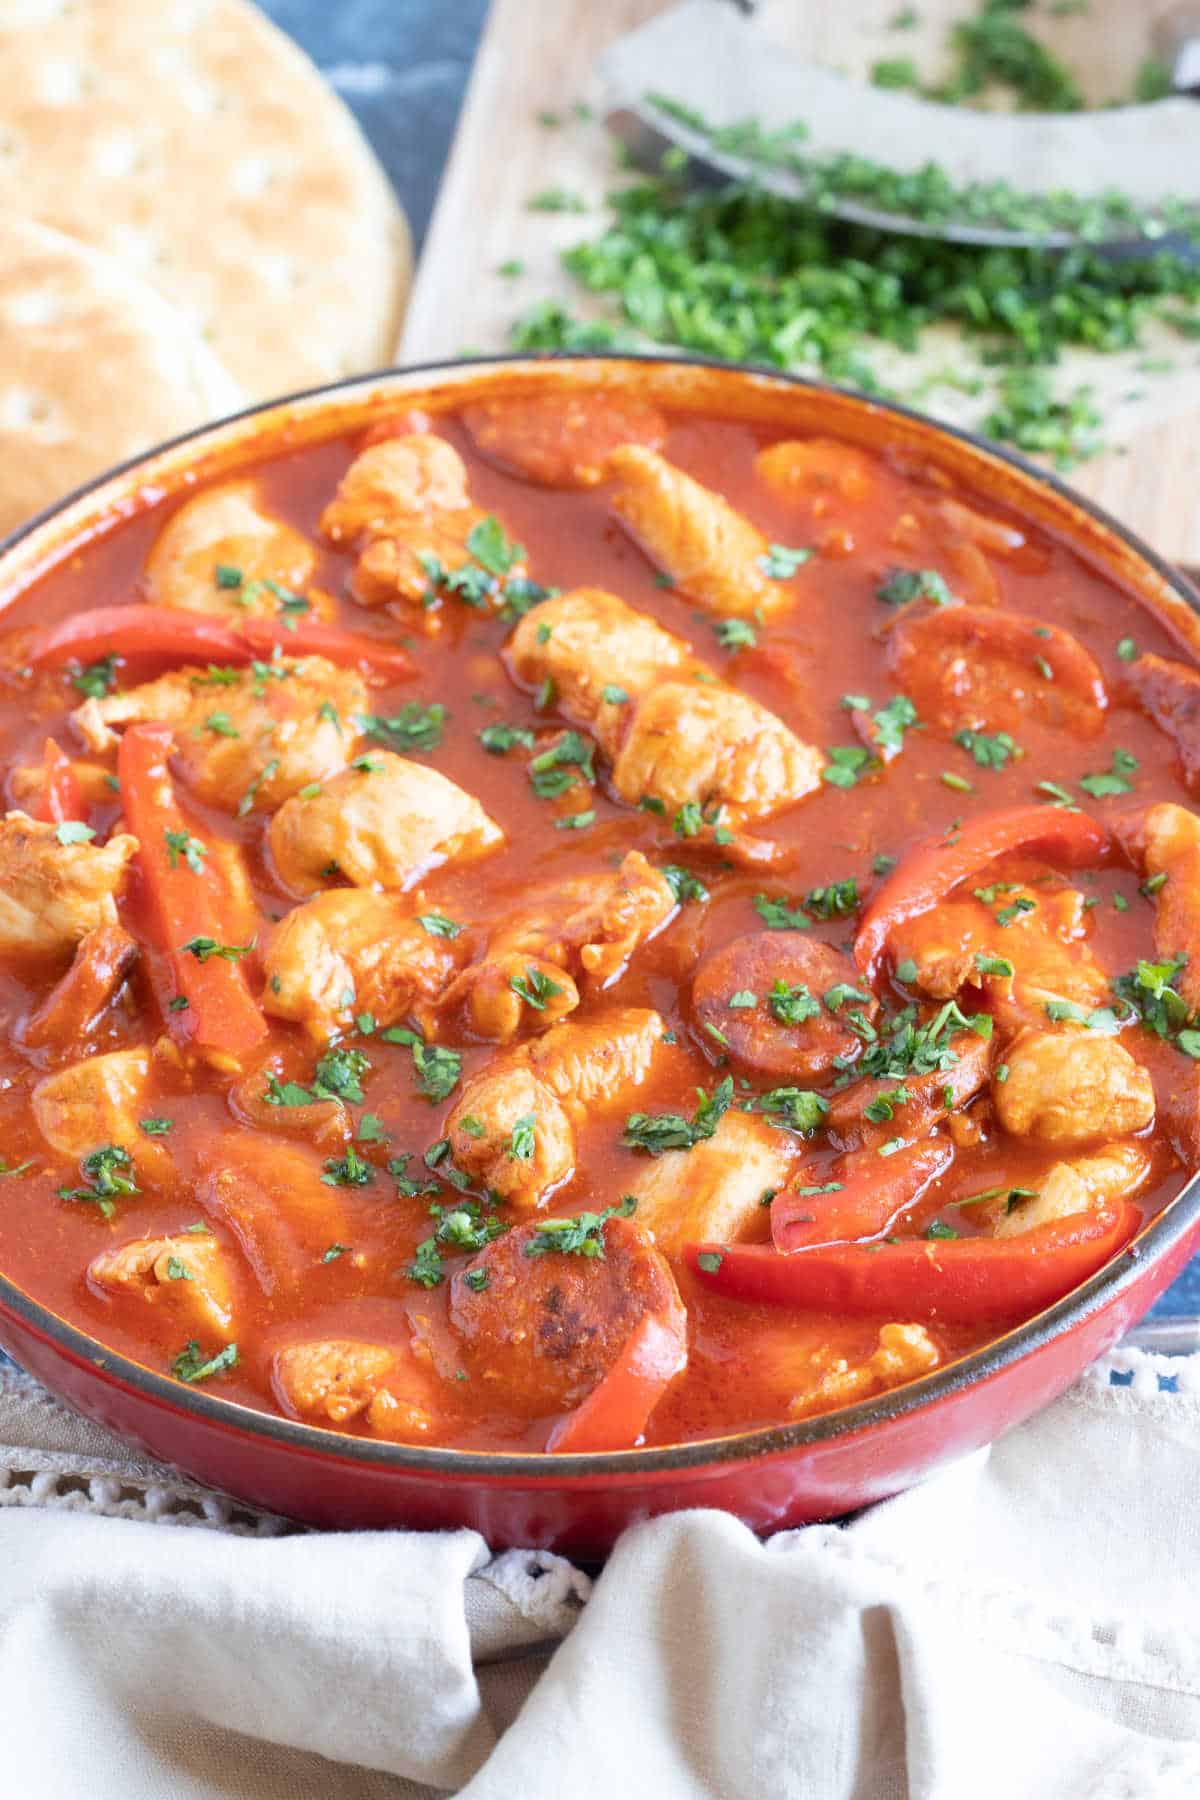 Chicken and chorizo stew with peppers.